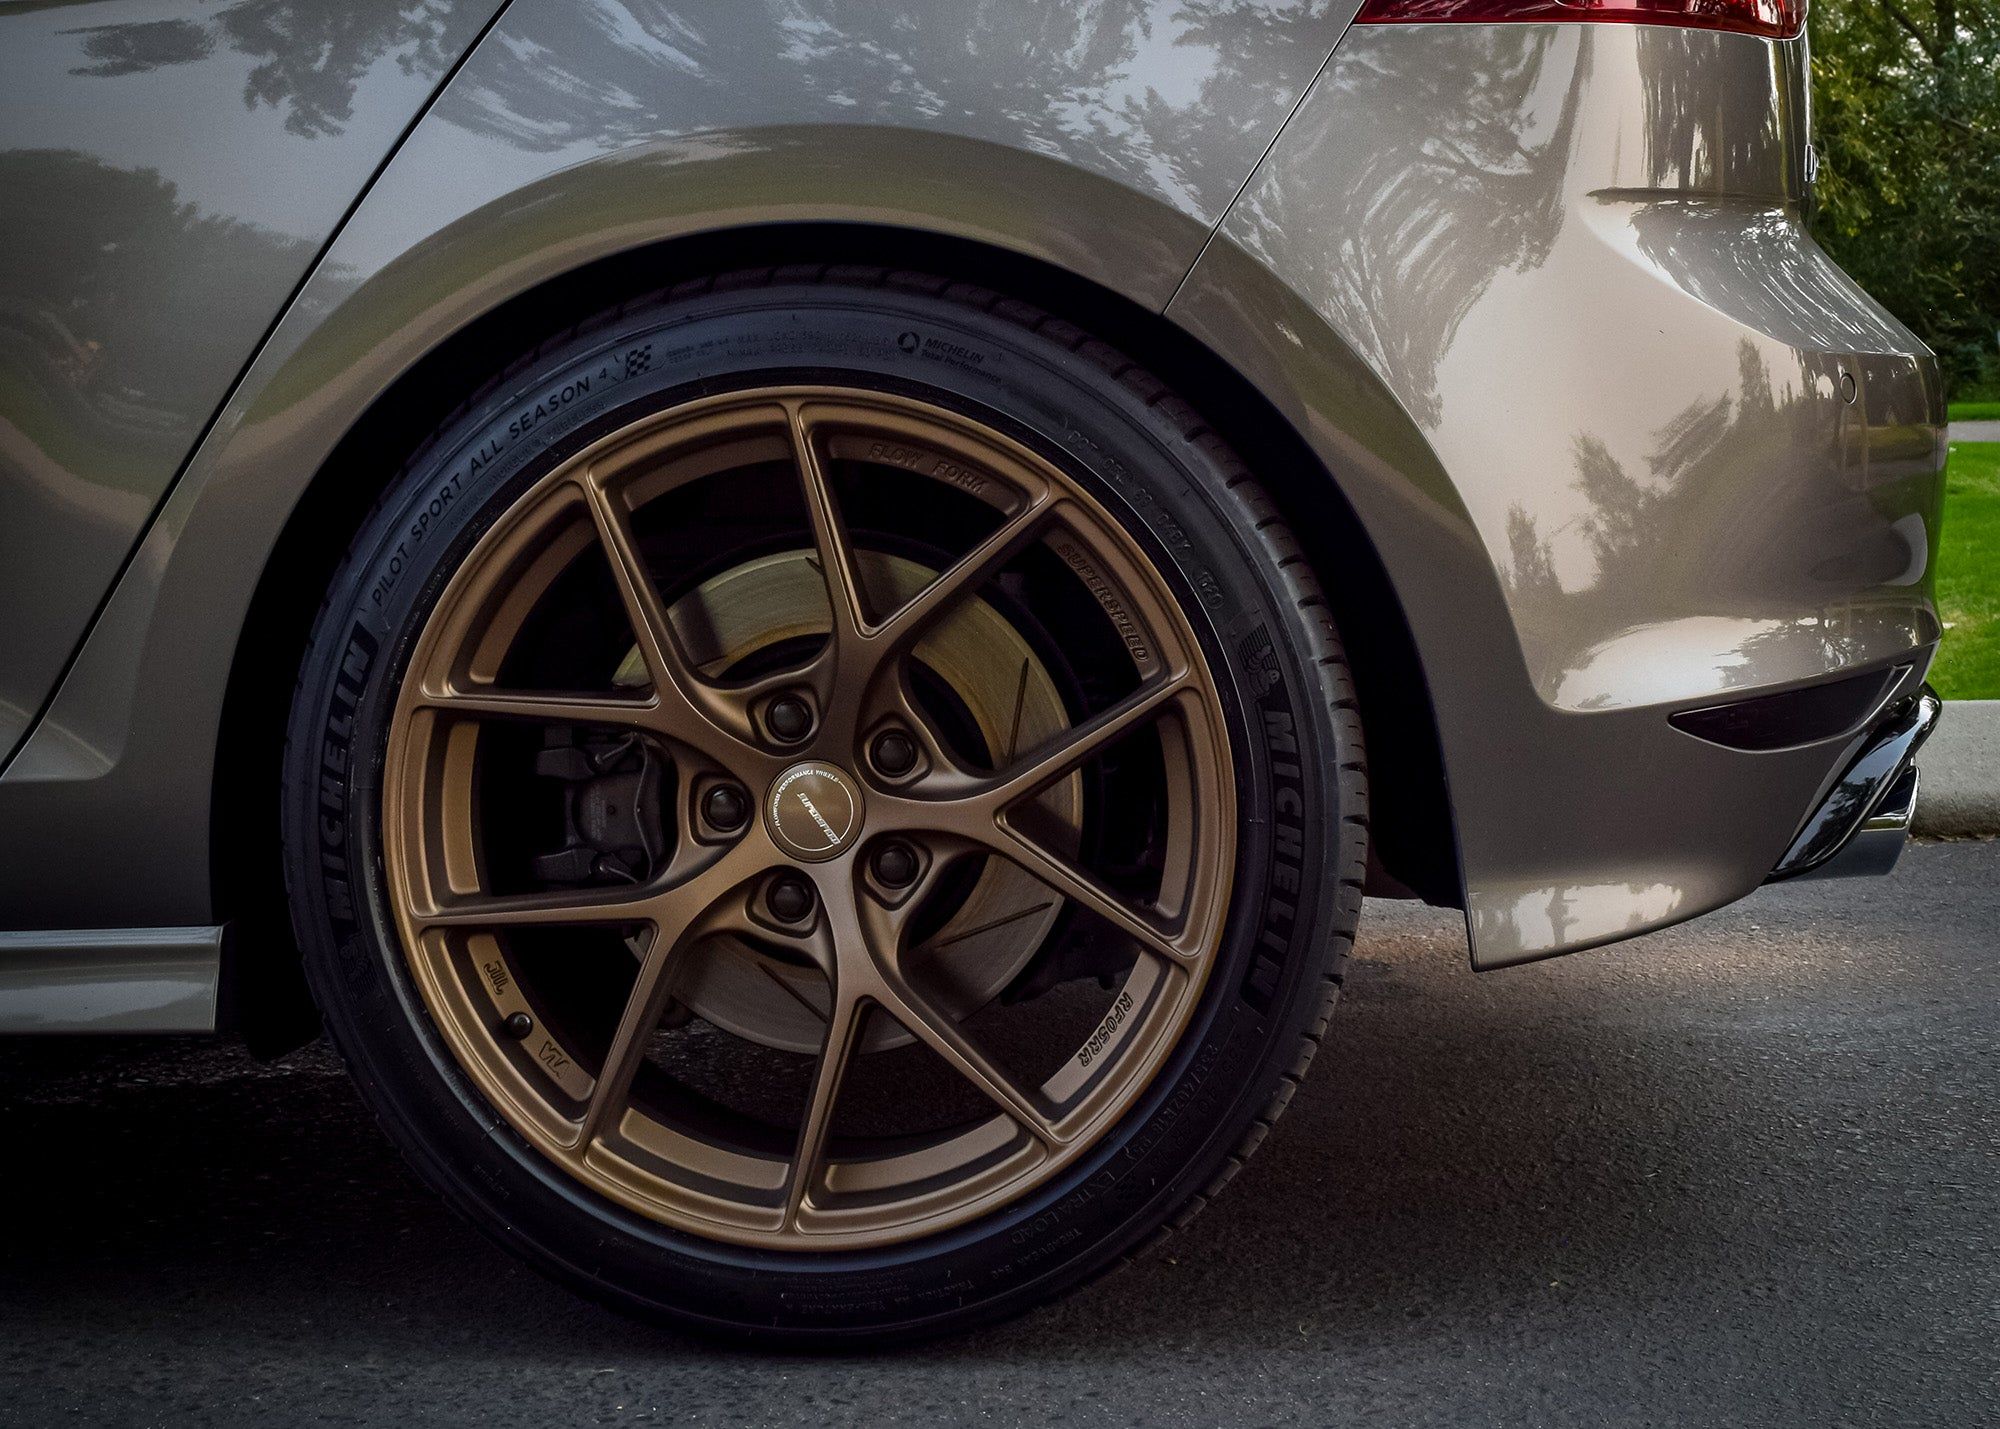 ⚡️You can find Superspeed RF05RR Satin Bronze - 18x9.5